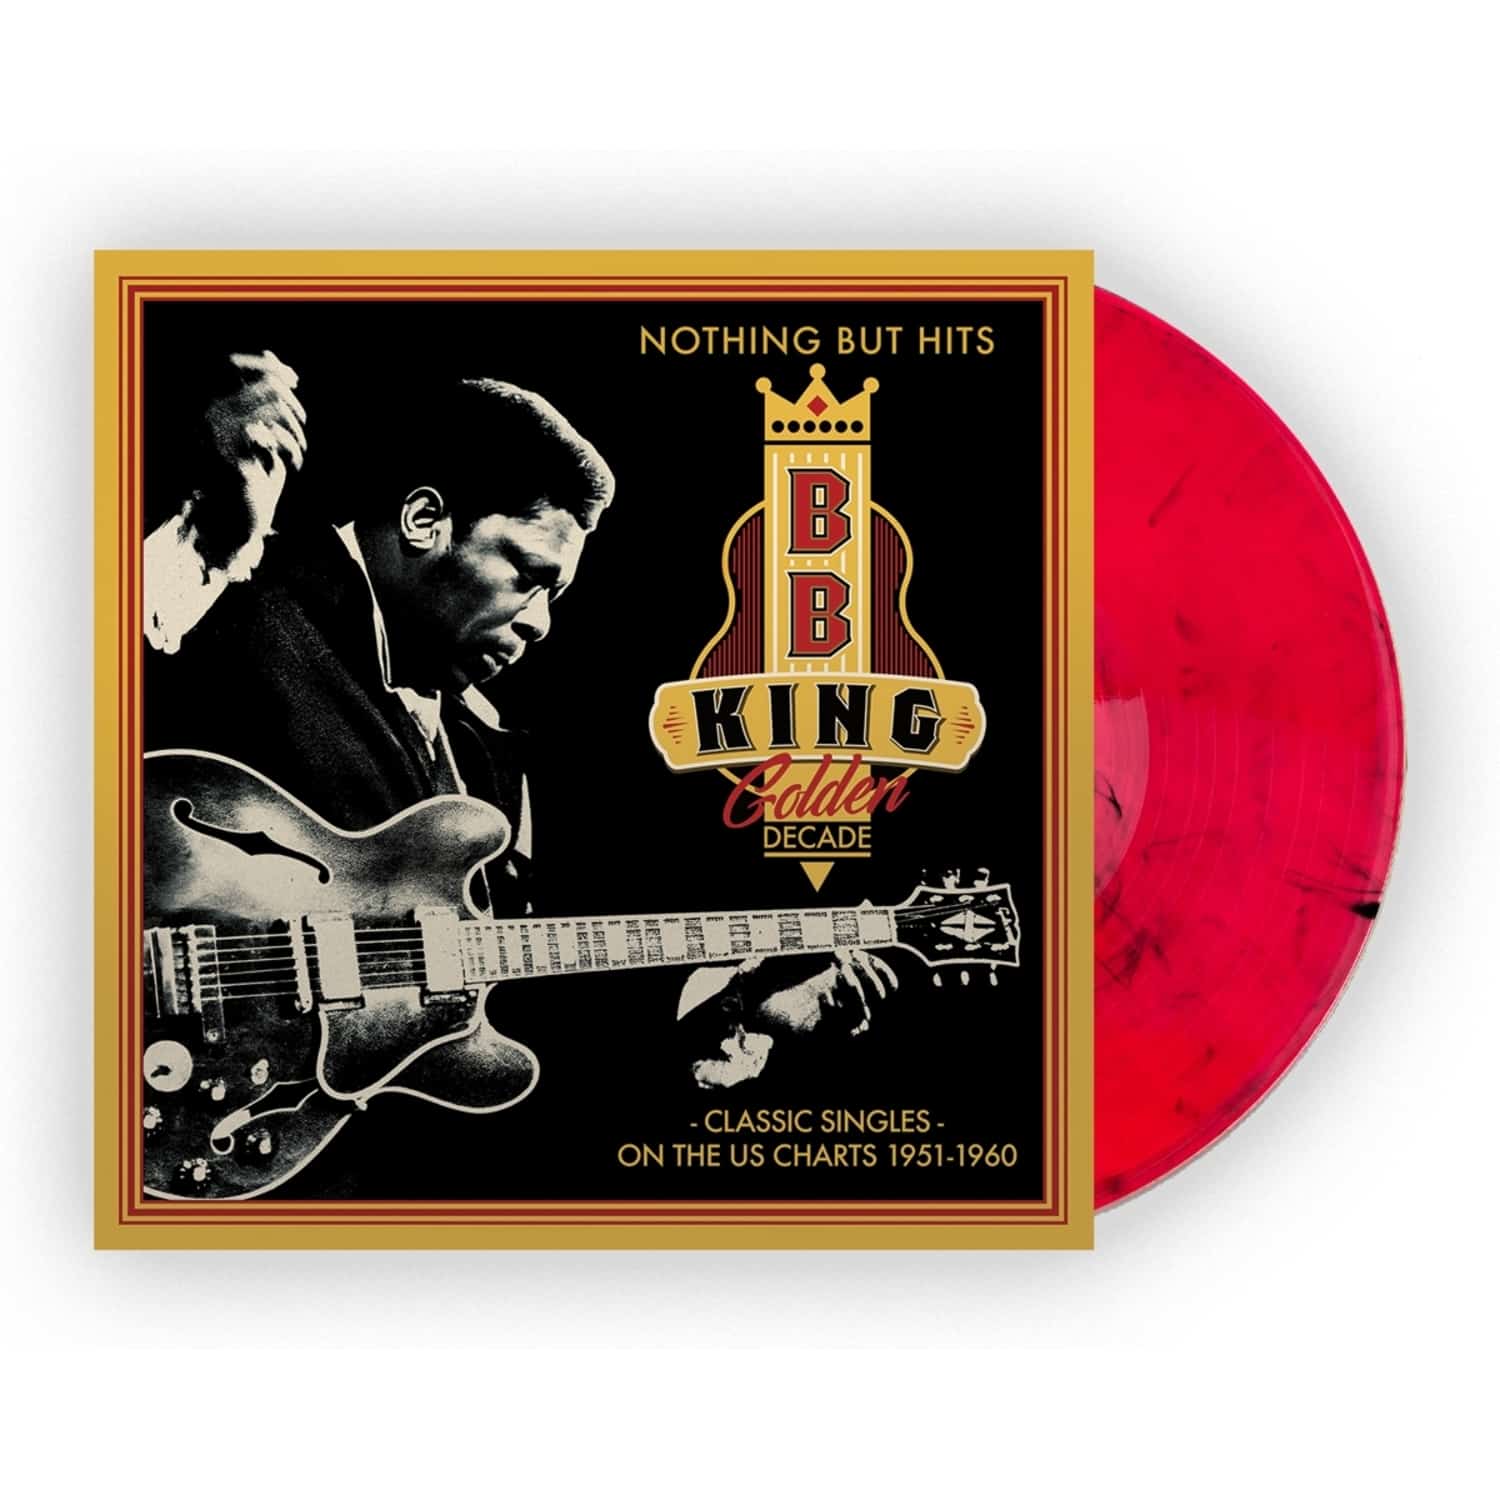 B.B. King - GOLDEN DECADE - NOTHING BUT HITS 